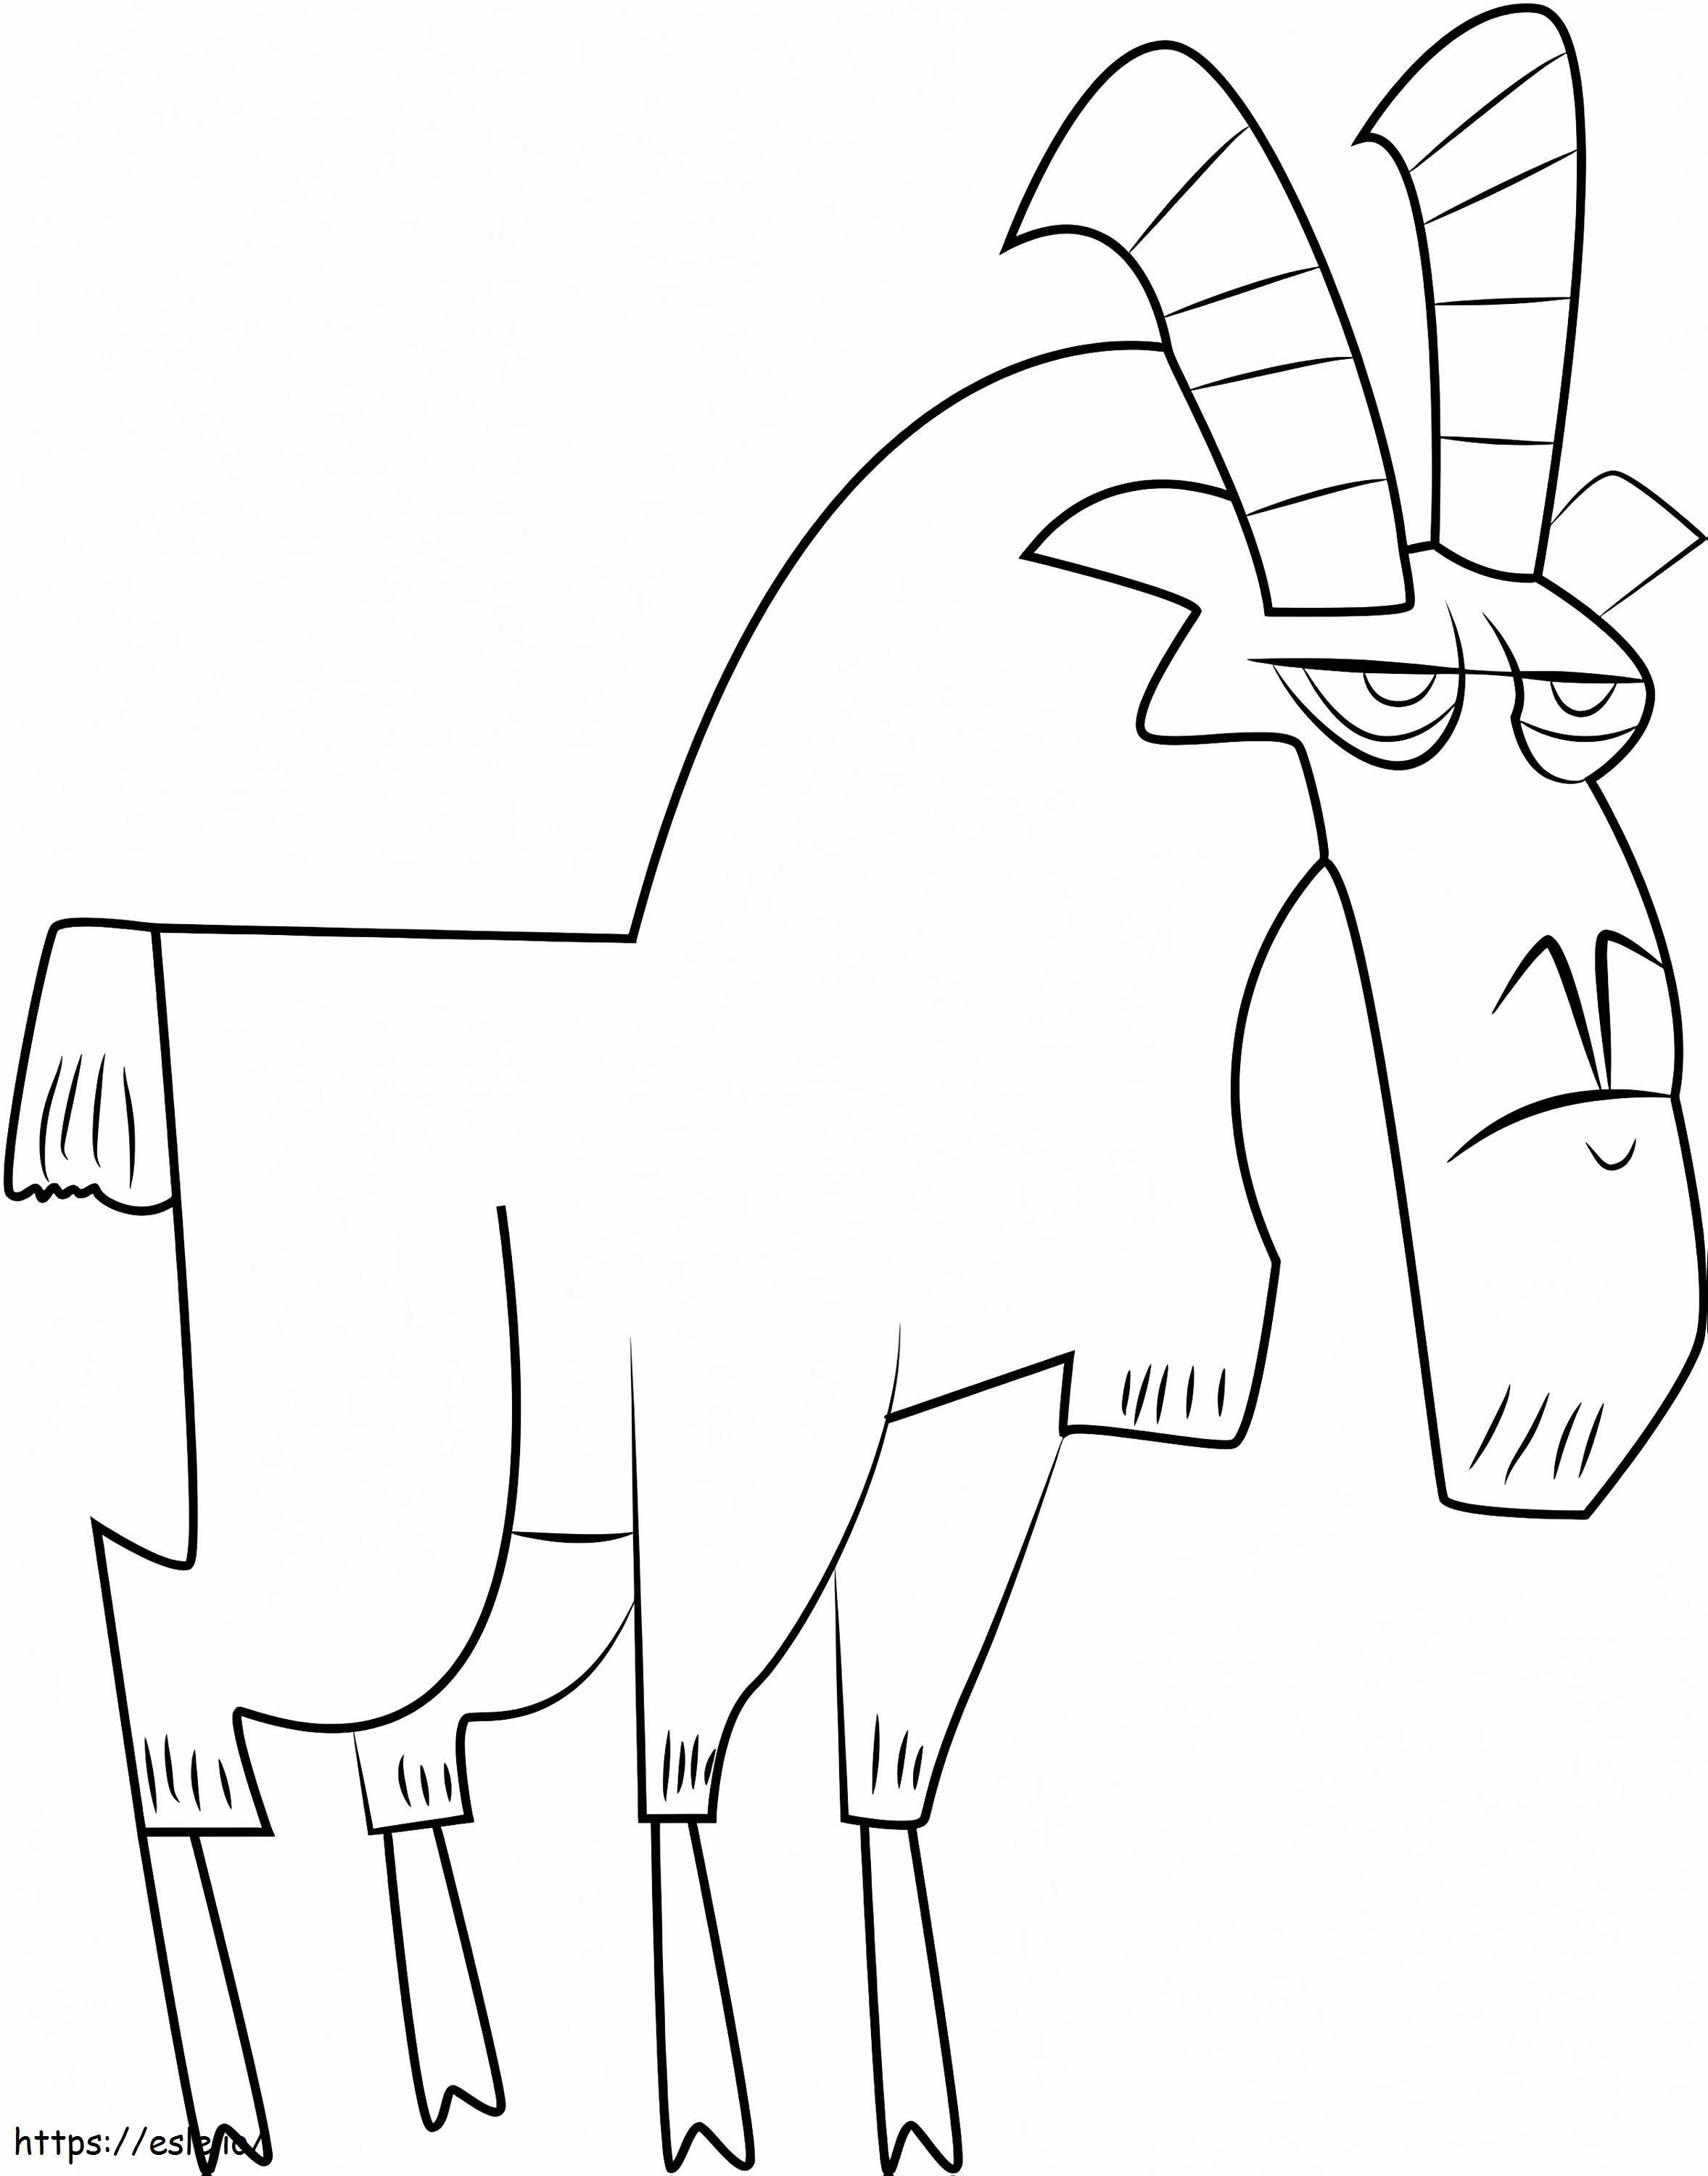 1531879034 Cartoon Goat A4 coloring page